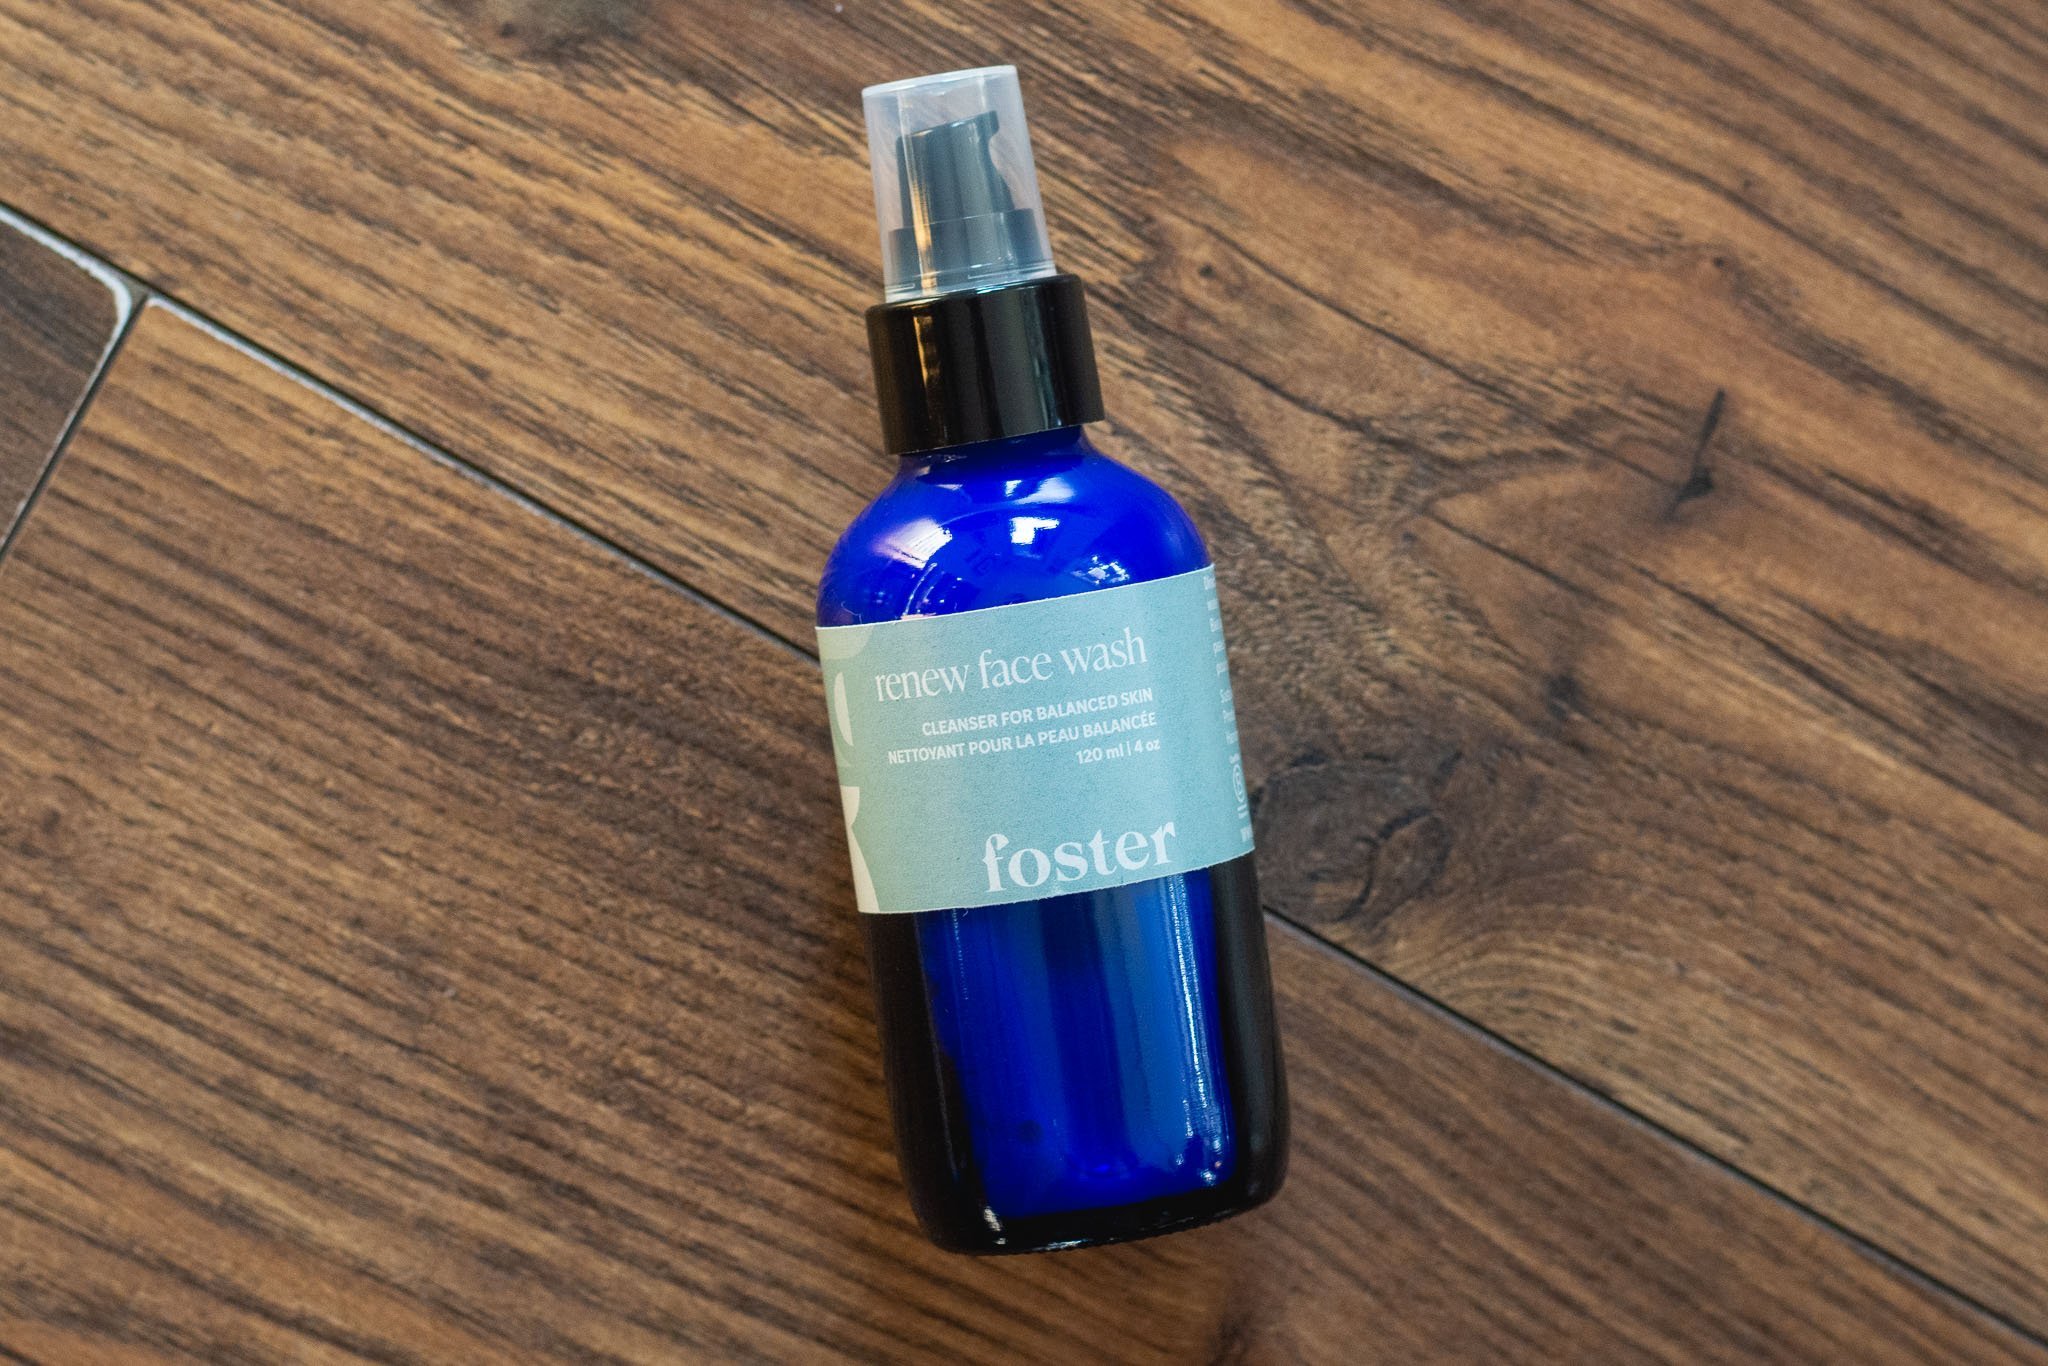 Renew Face Wash by Foster